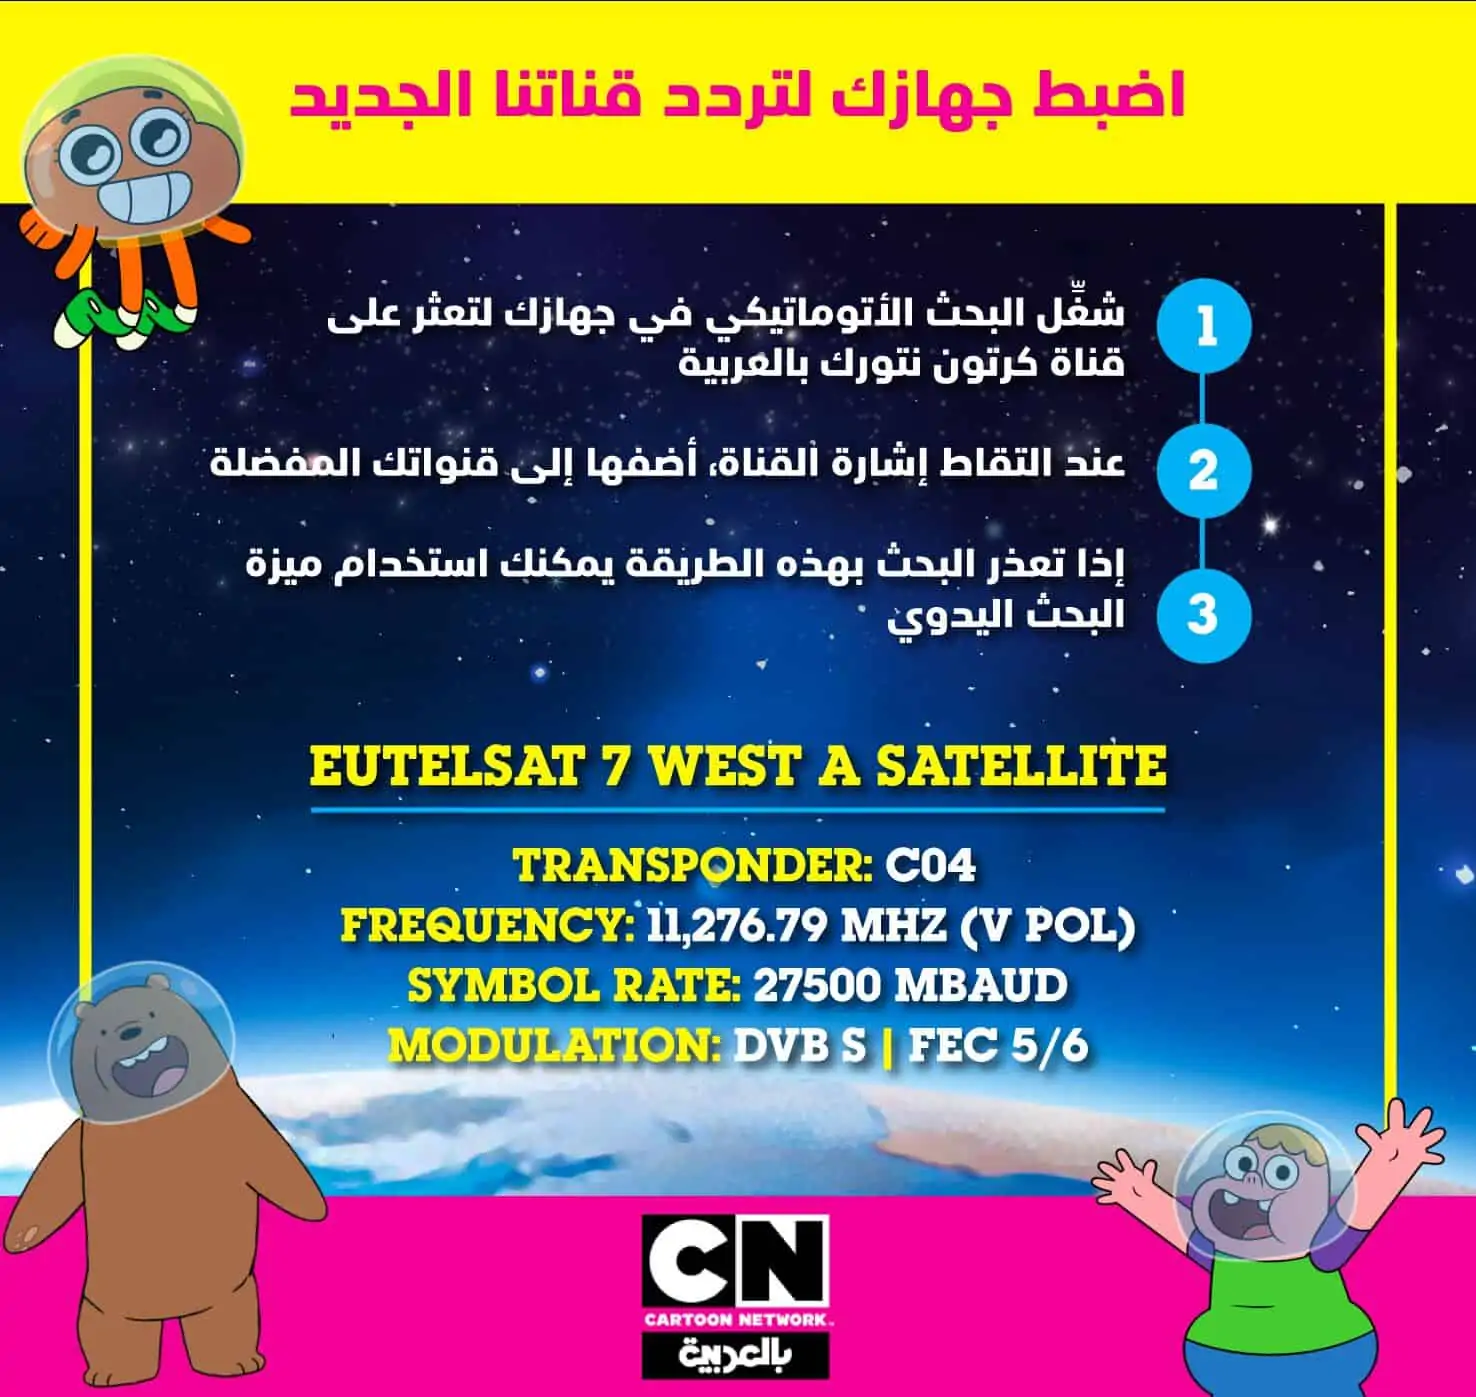 CN frequency